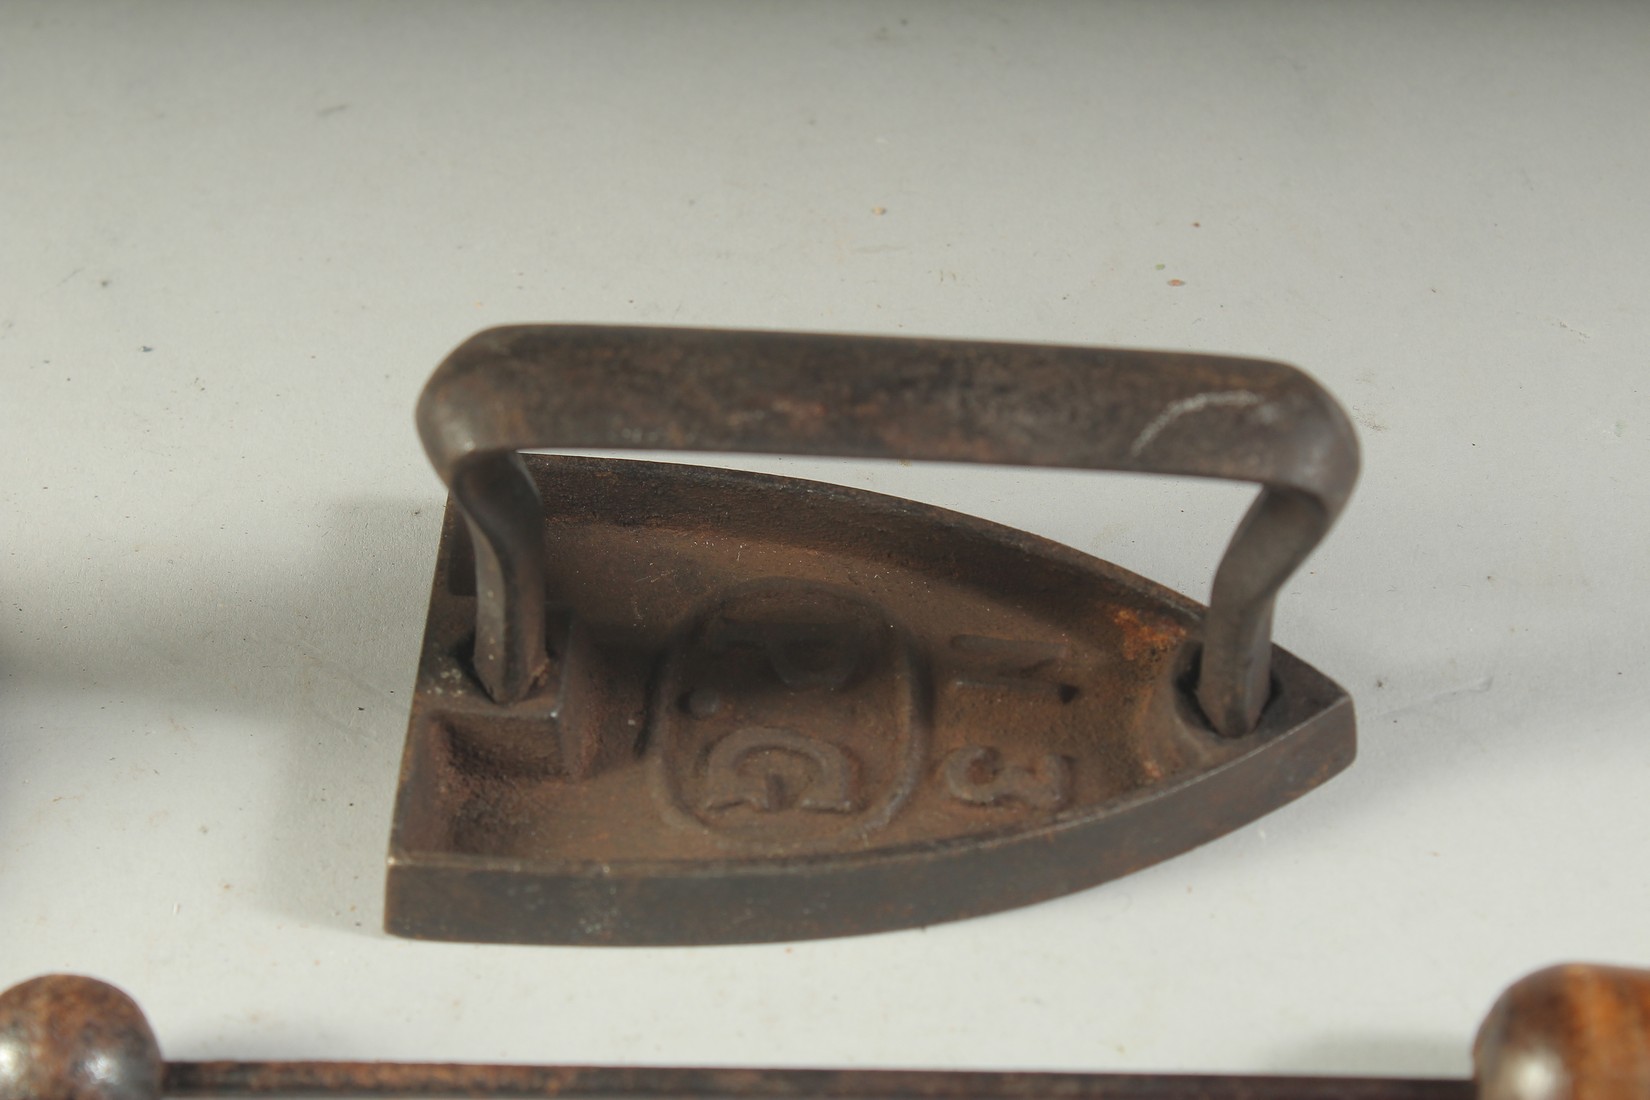 FINE ANTIQUE METAL AND WOODEN IRONS. - Image 3 of 4